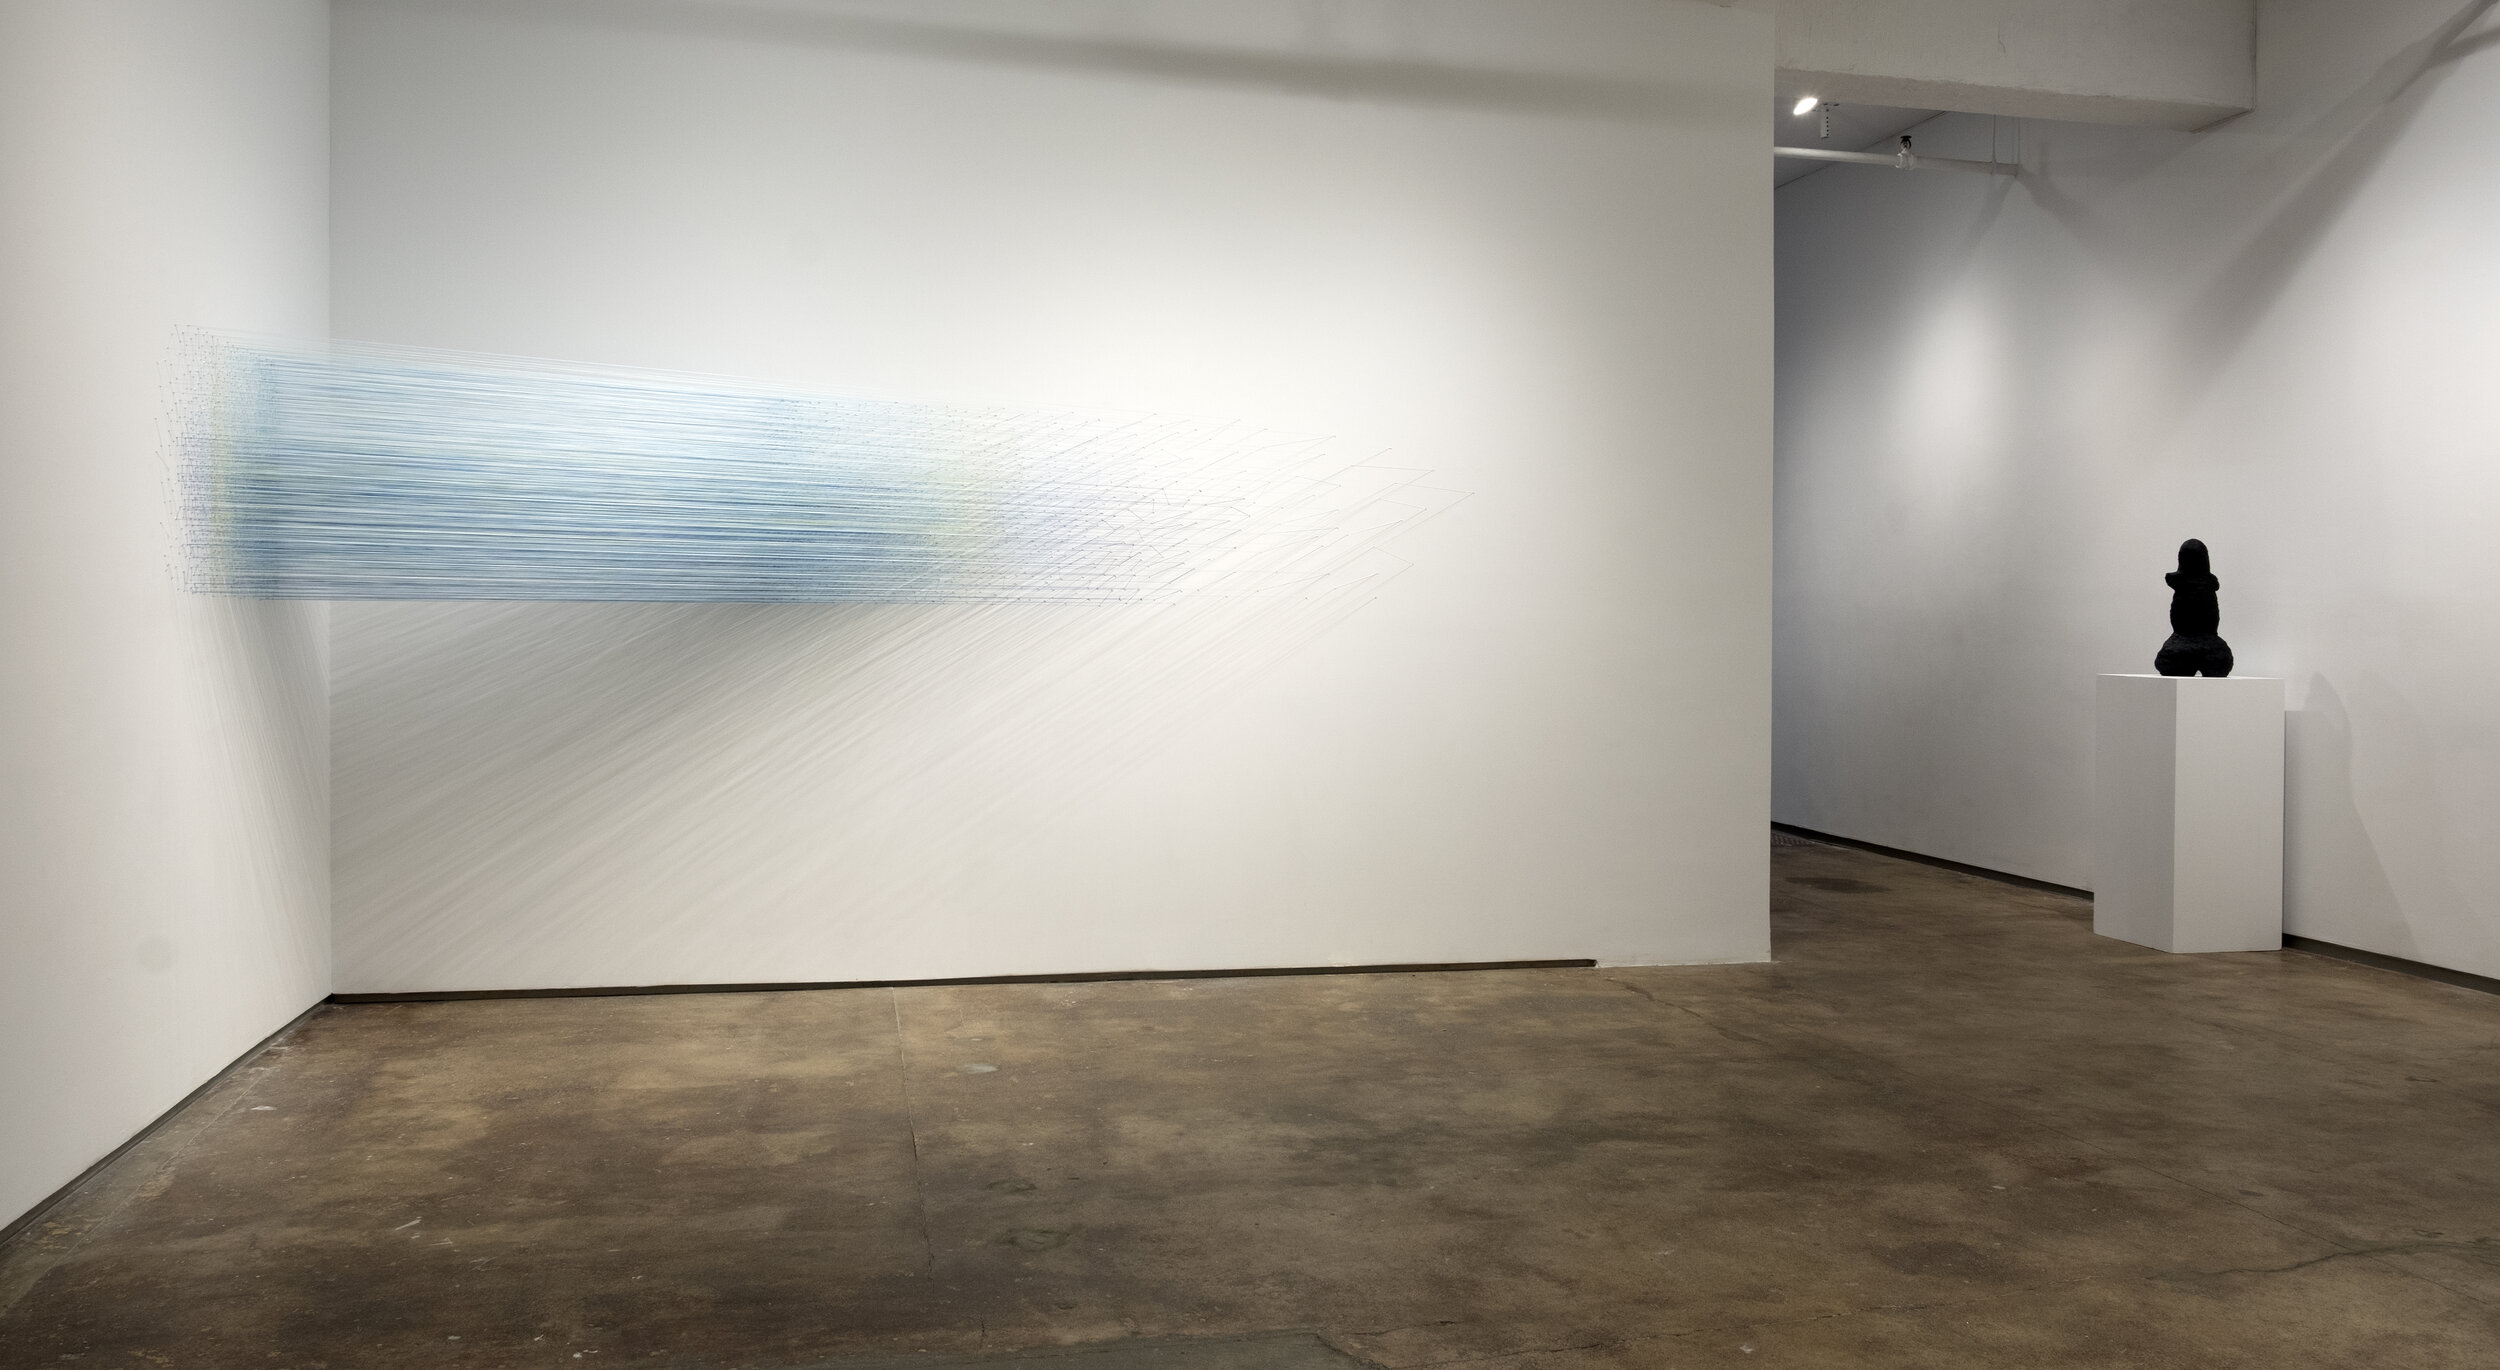    30 birds   2019 cotton thread and staples 2 x 9 x 5 feet photography by Derek Porter  with work by Hope Atherton to the right 